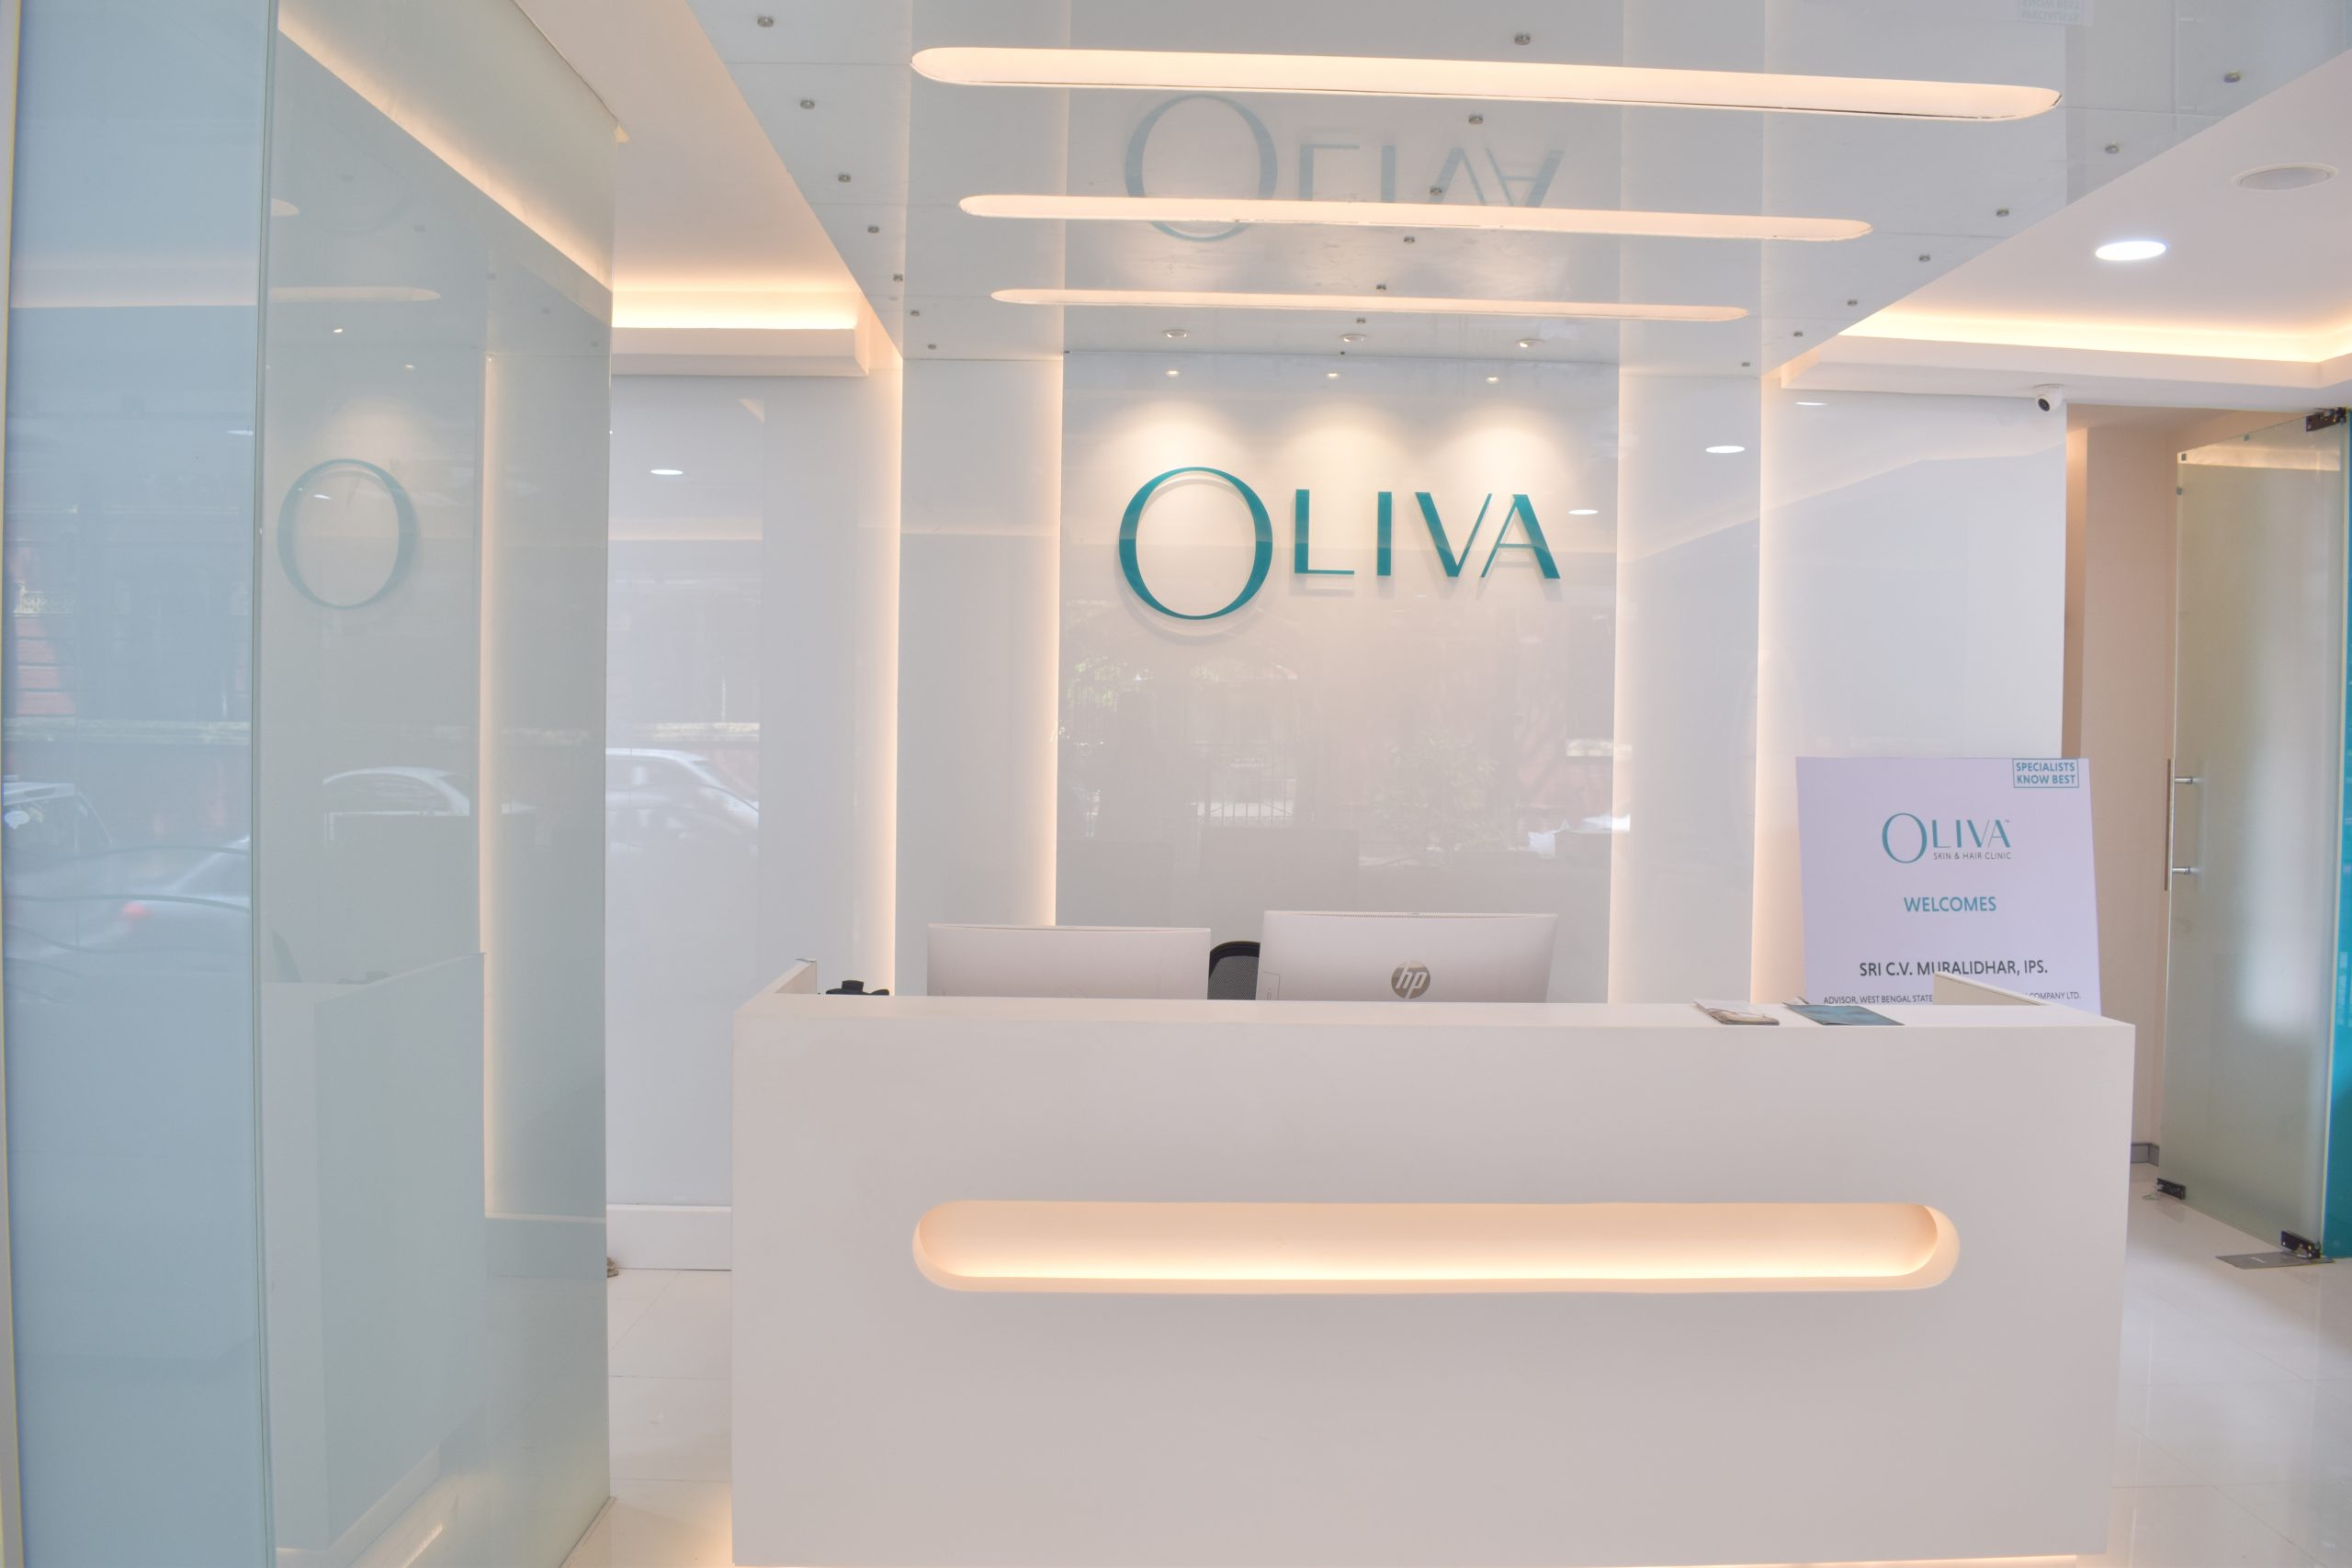 Oliva Skin and Hair Clinic - Get upto 50% off on our services this #Diwali!  To book an appointment with Oliva Skin and Hair Clinic, call us on  +91-8377960970! | Facebook